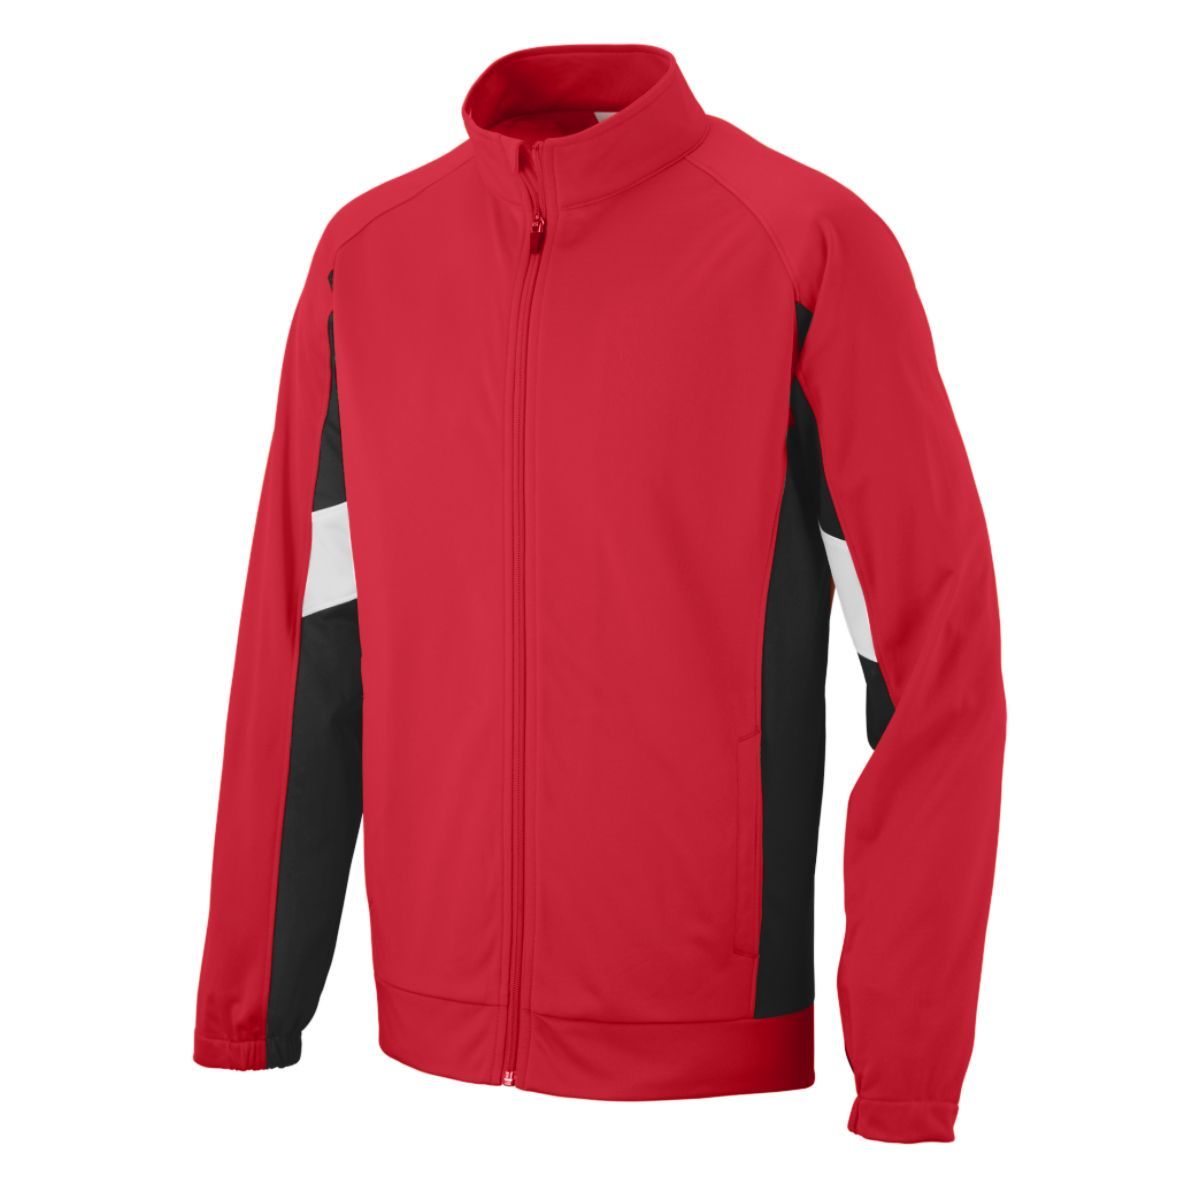 Augusta Sportswear Youth Tour De Force Jacket in Red/Black/White  -Part of the Youth, Youth-Jacket, Augusta-Products, Outerwear product lines at KanaleyCreations.com